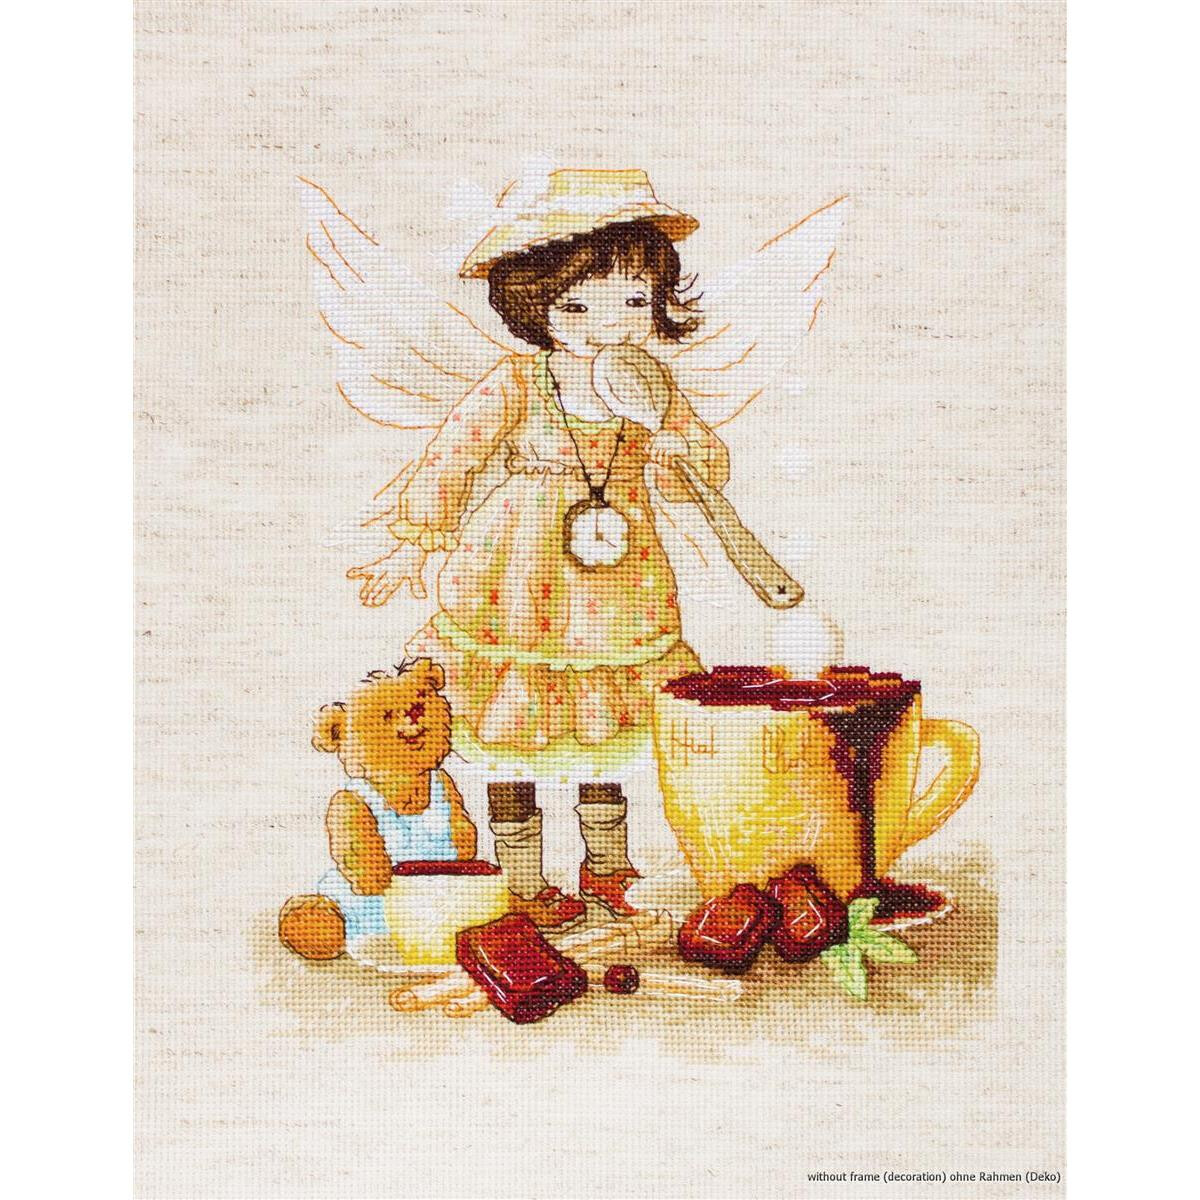 Luca-S counted Cross Stitch kit "Chocolate...